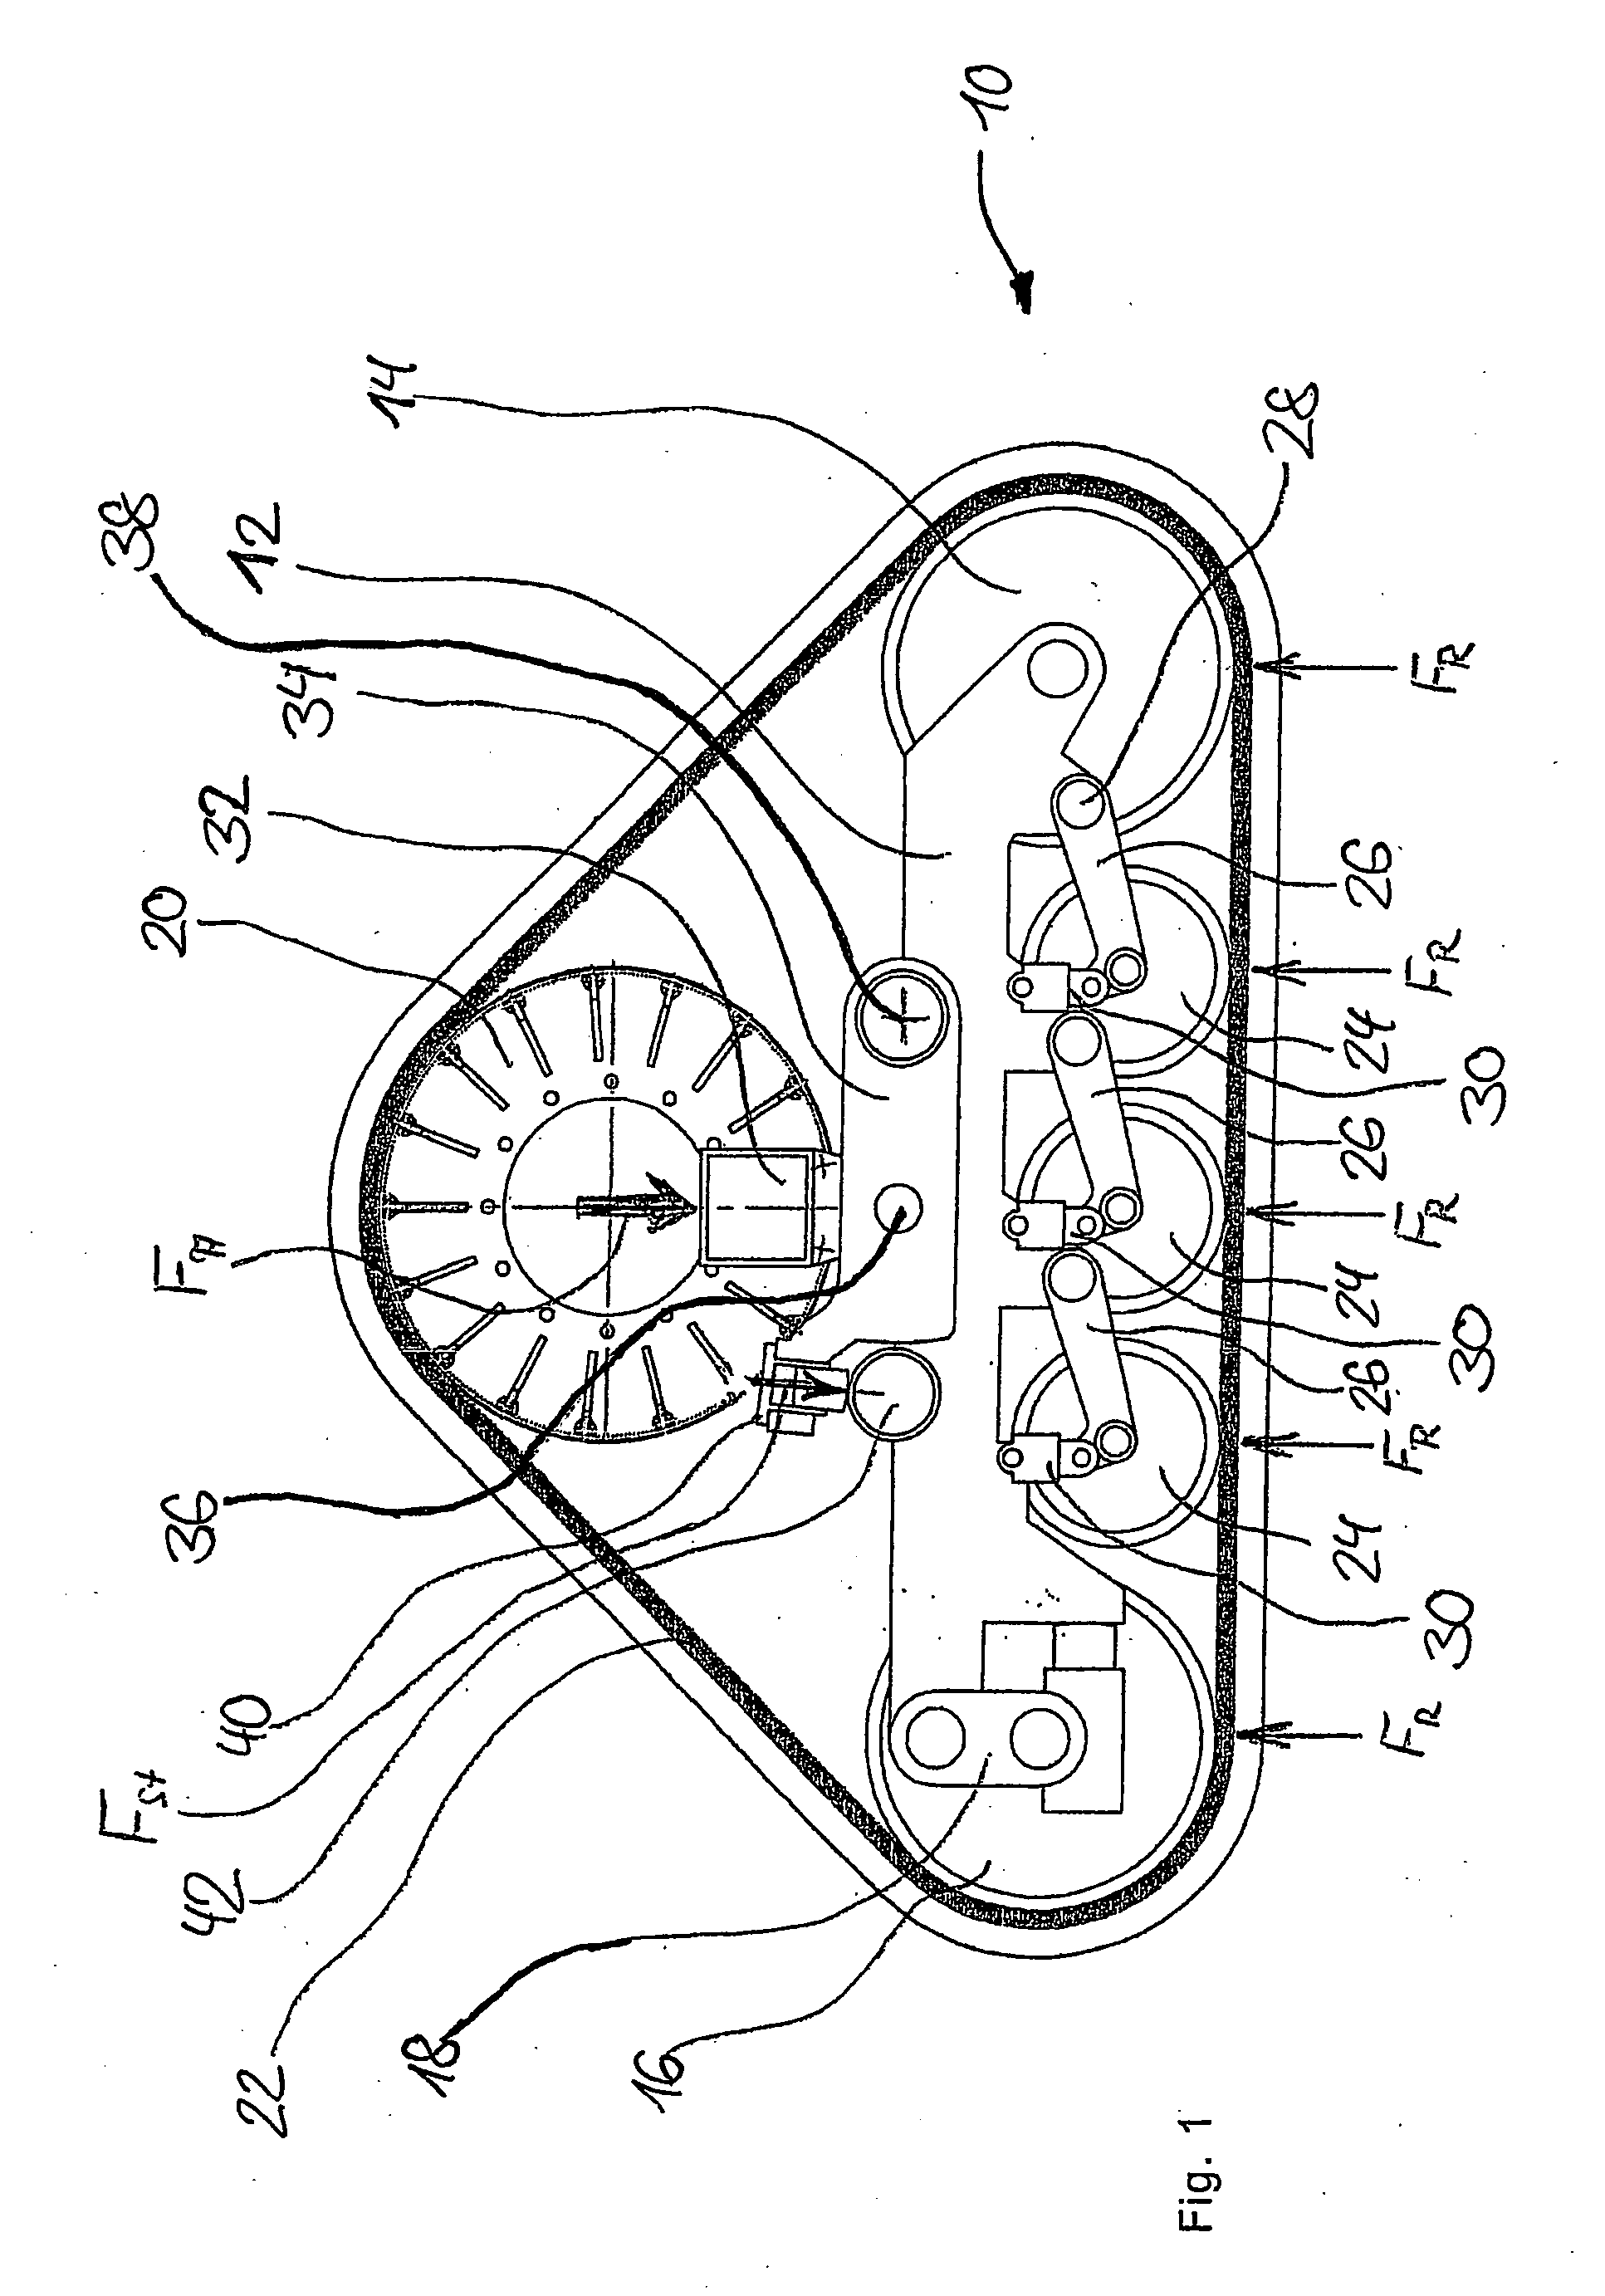 Traveling Mechanism for Agricultural Machines and Off-Road Vehicles Having an Endless Belt -Band Traveling Gear and a Corresponding Belt-Band Traveling Gear